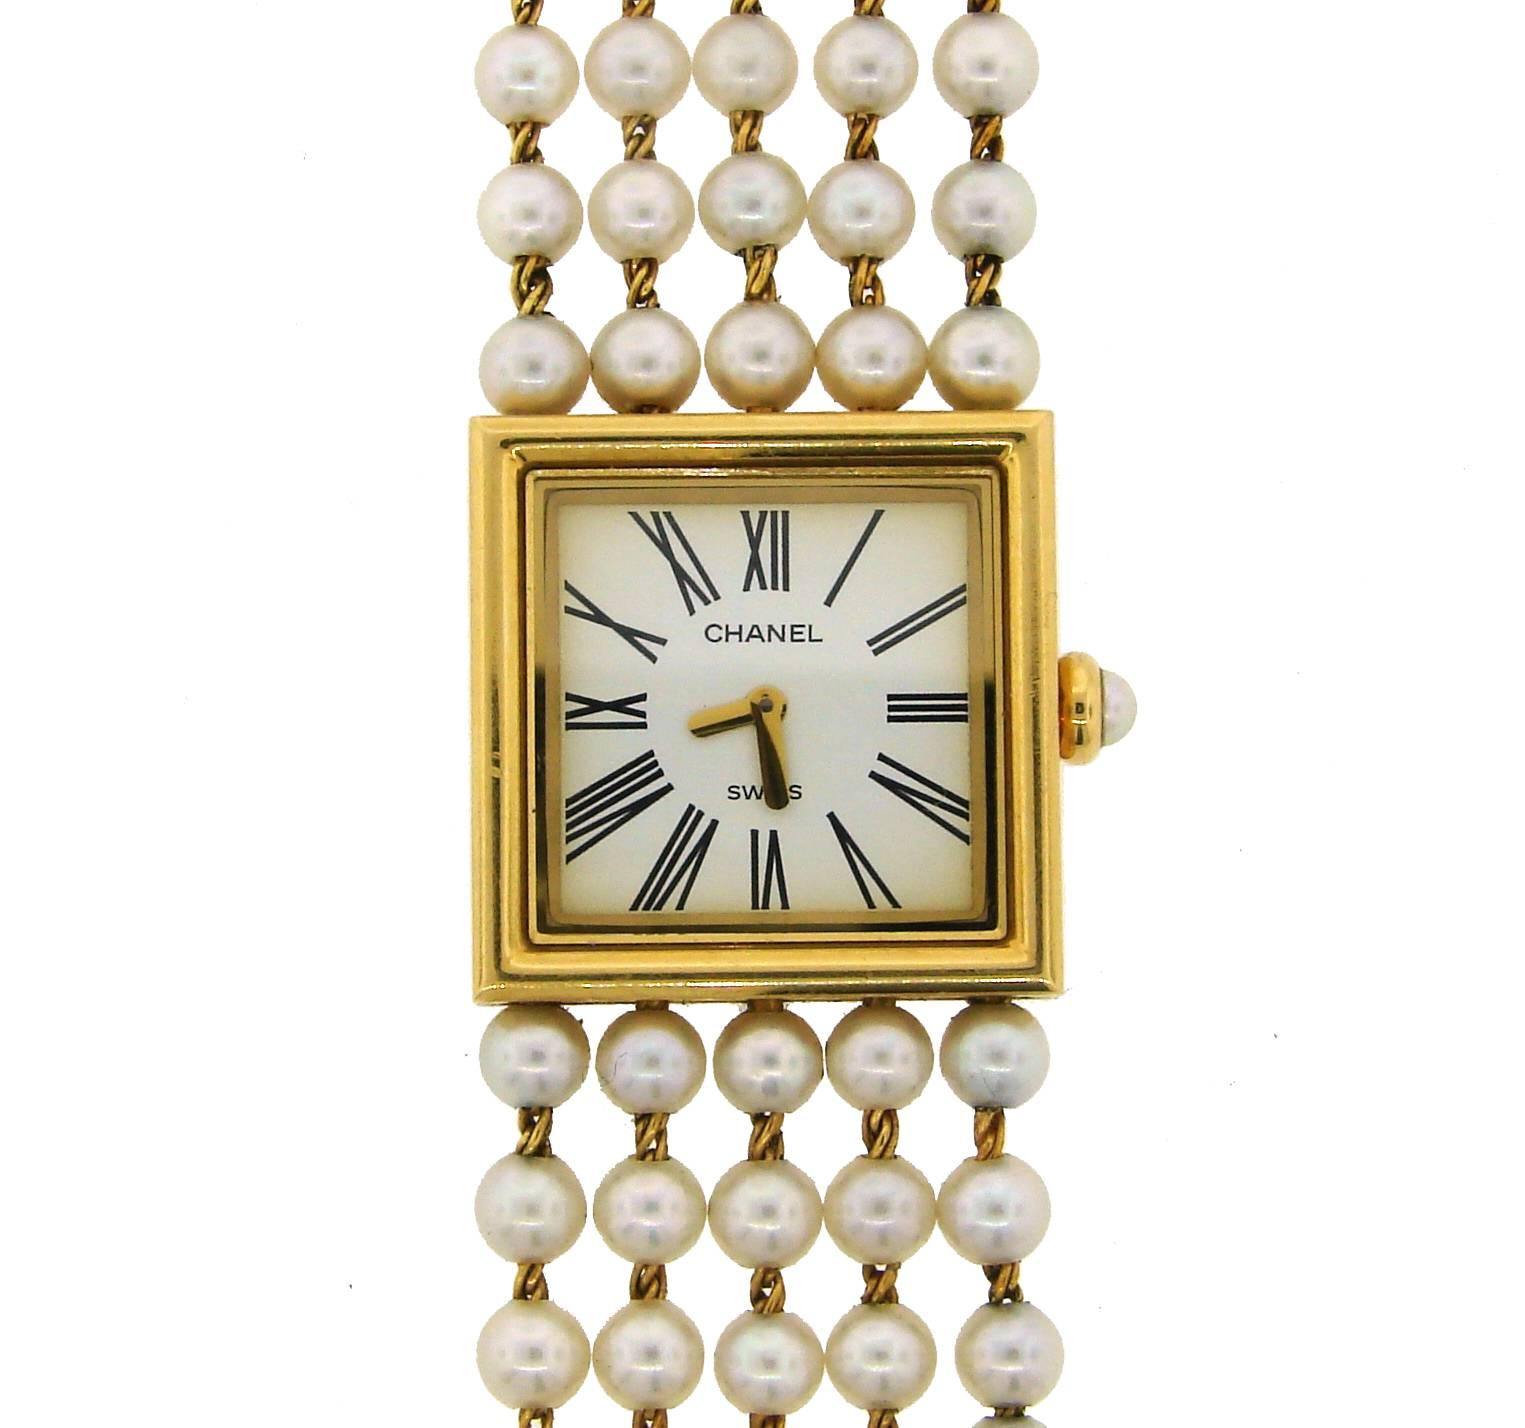 Chic Chanel watch/bracelet created in 1989. Classy and feminine piece! Very Chanel! 
It is made of 18 karat yellow gold and pearl.
The face measures 7/8